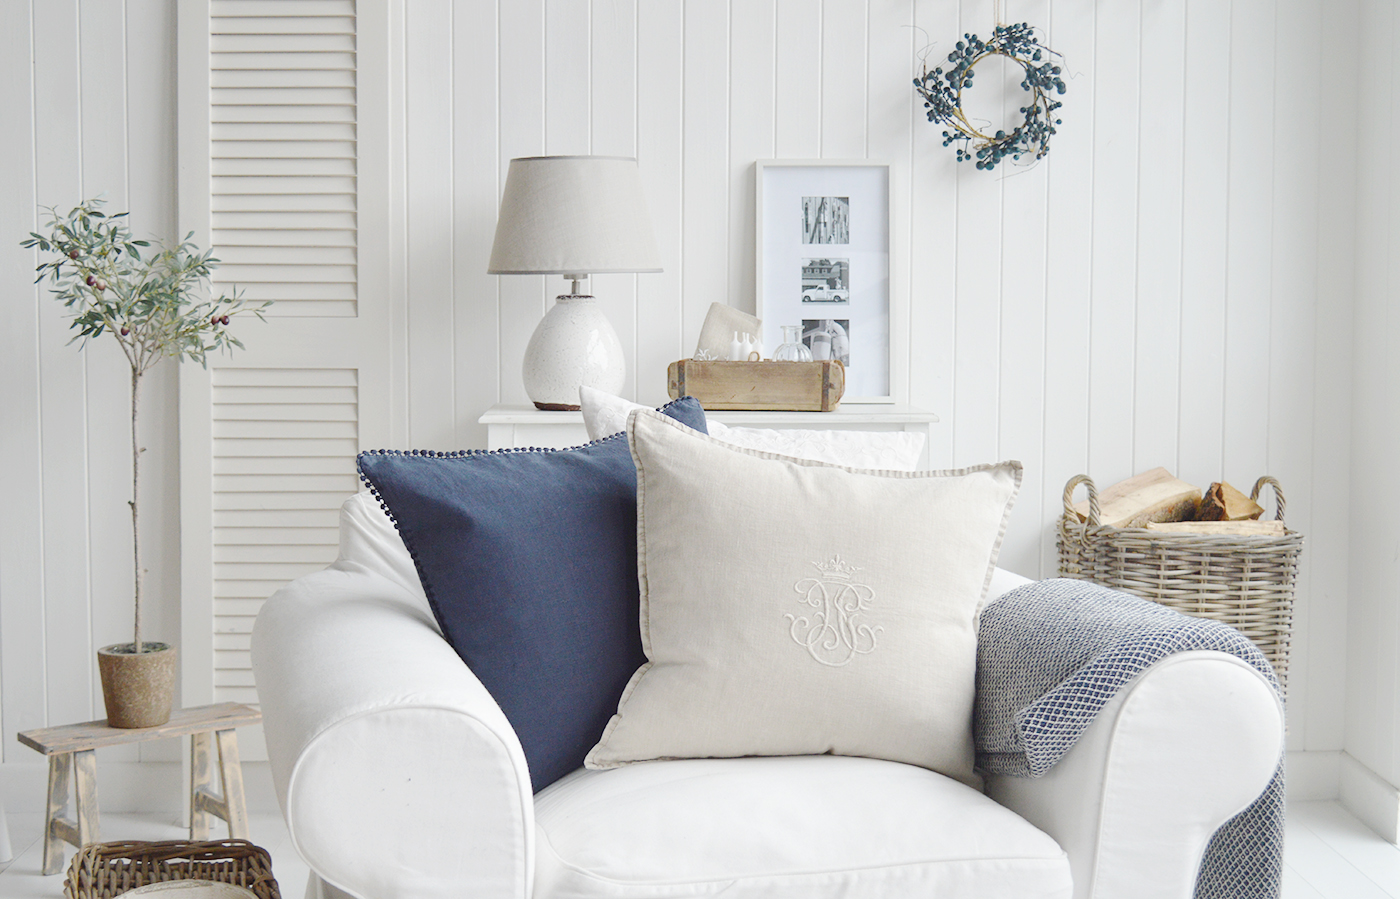 New England country and coastal furniture and home decor for the living room